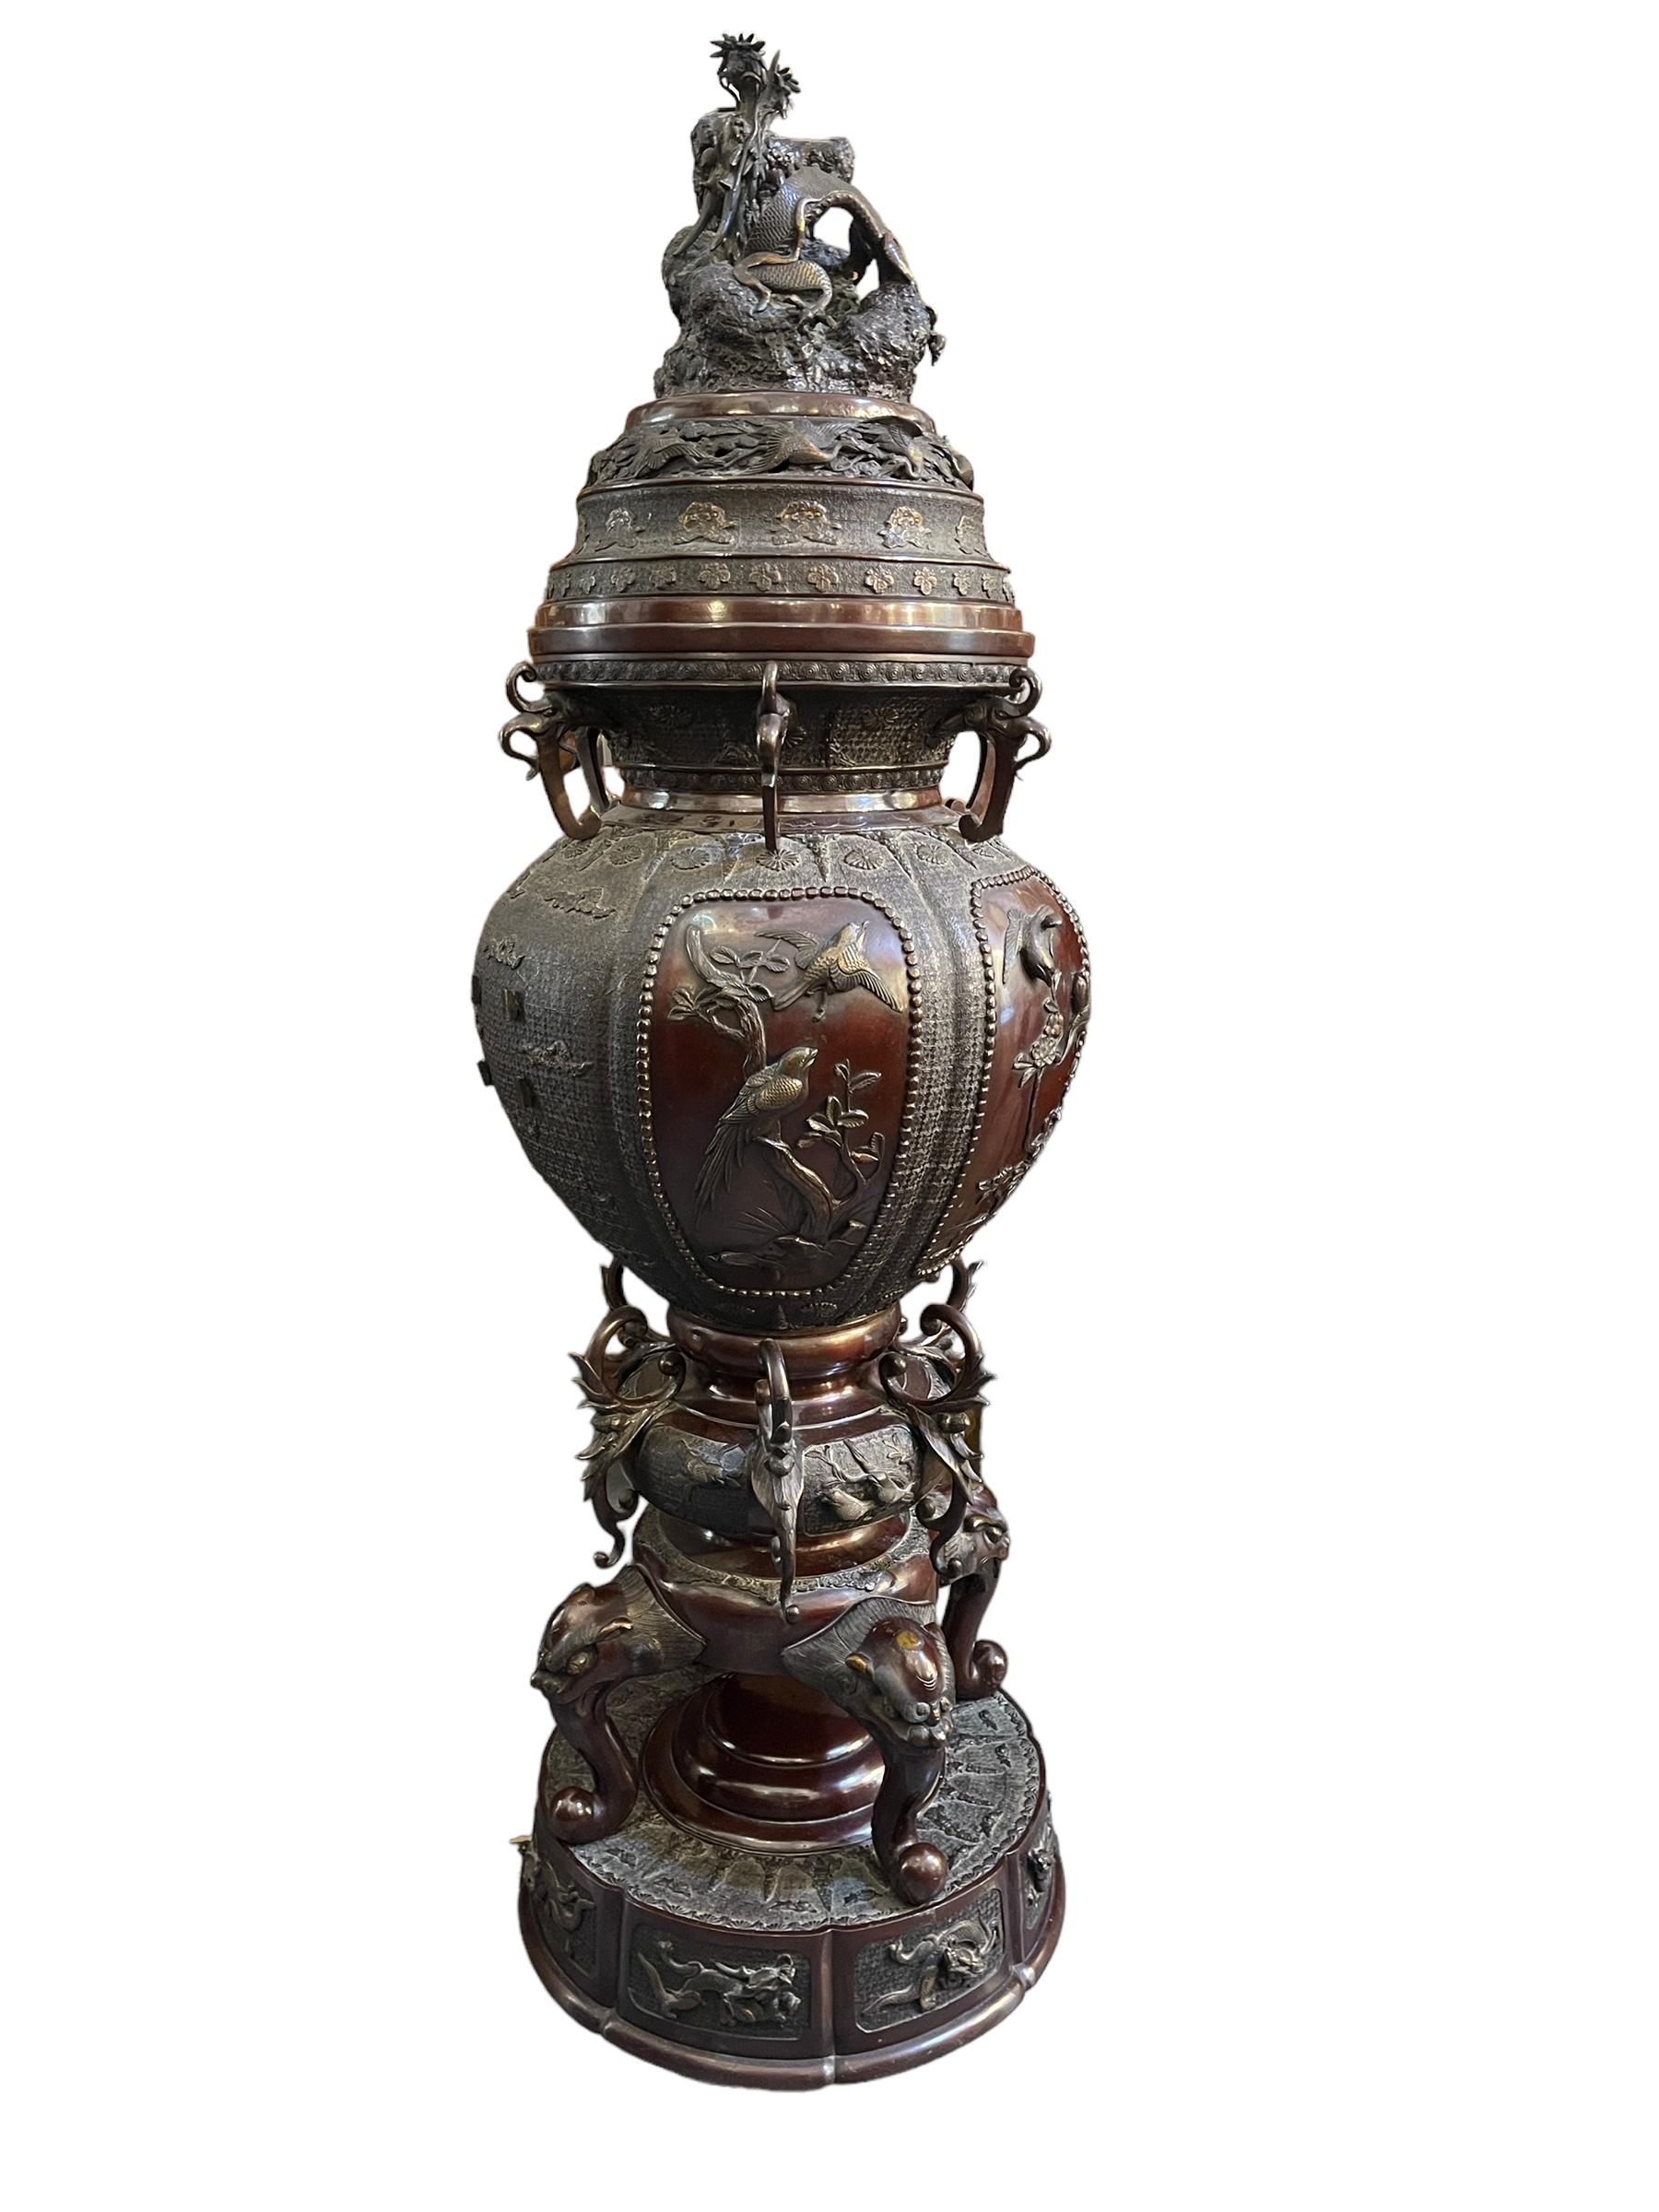 Imposing Japanese censer, 19th century, patinated bronze.
Japanese censer dating back to the end of the 19th century, patinated bronze, worked with friezes, animal, bird and floral themed decorations, and the upper cap is surmounted by a